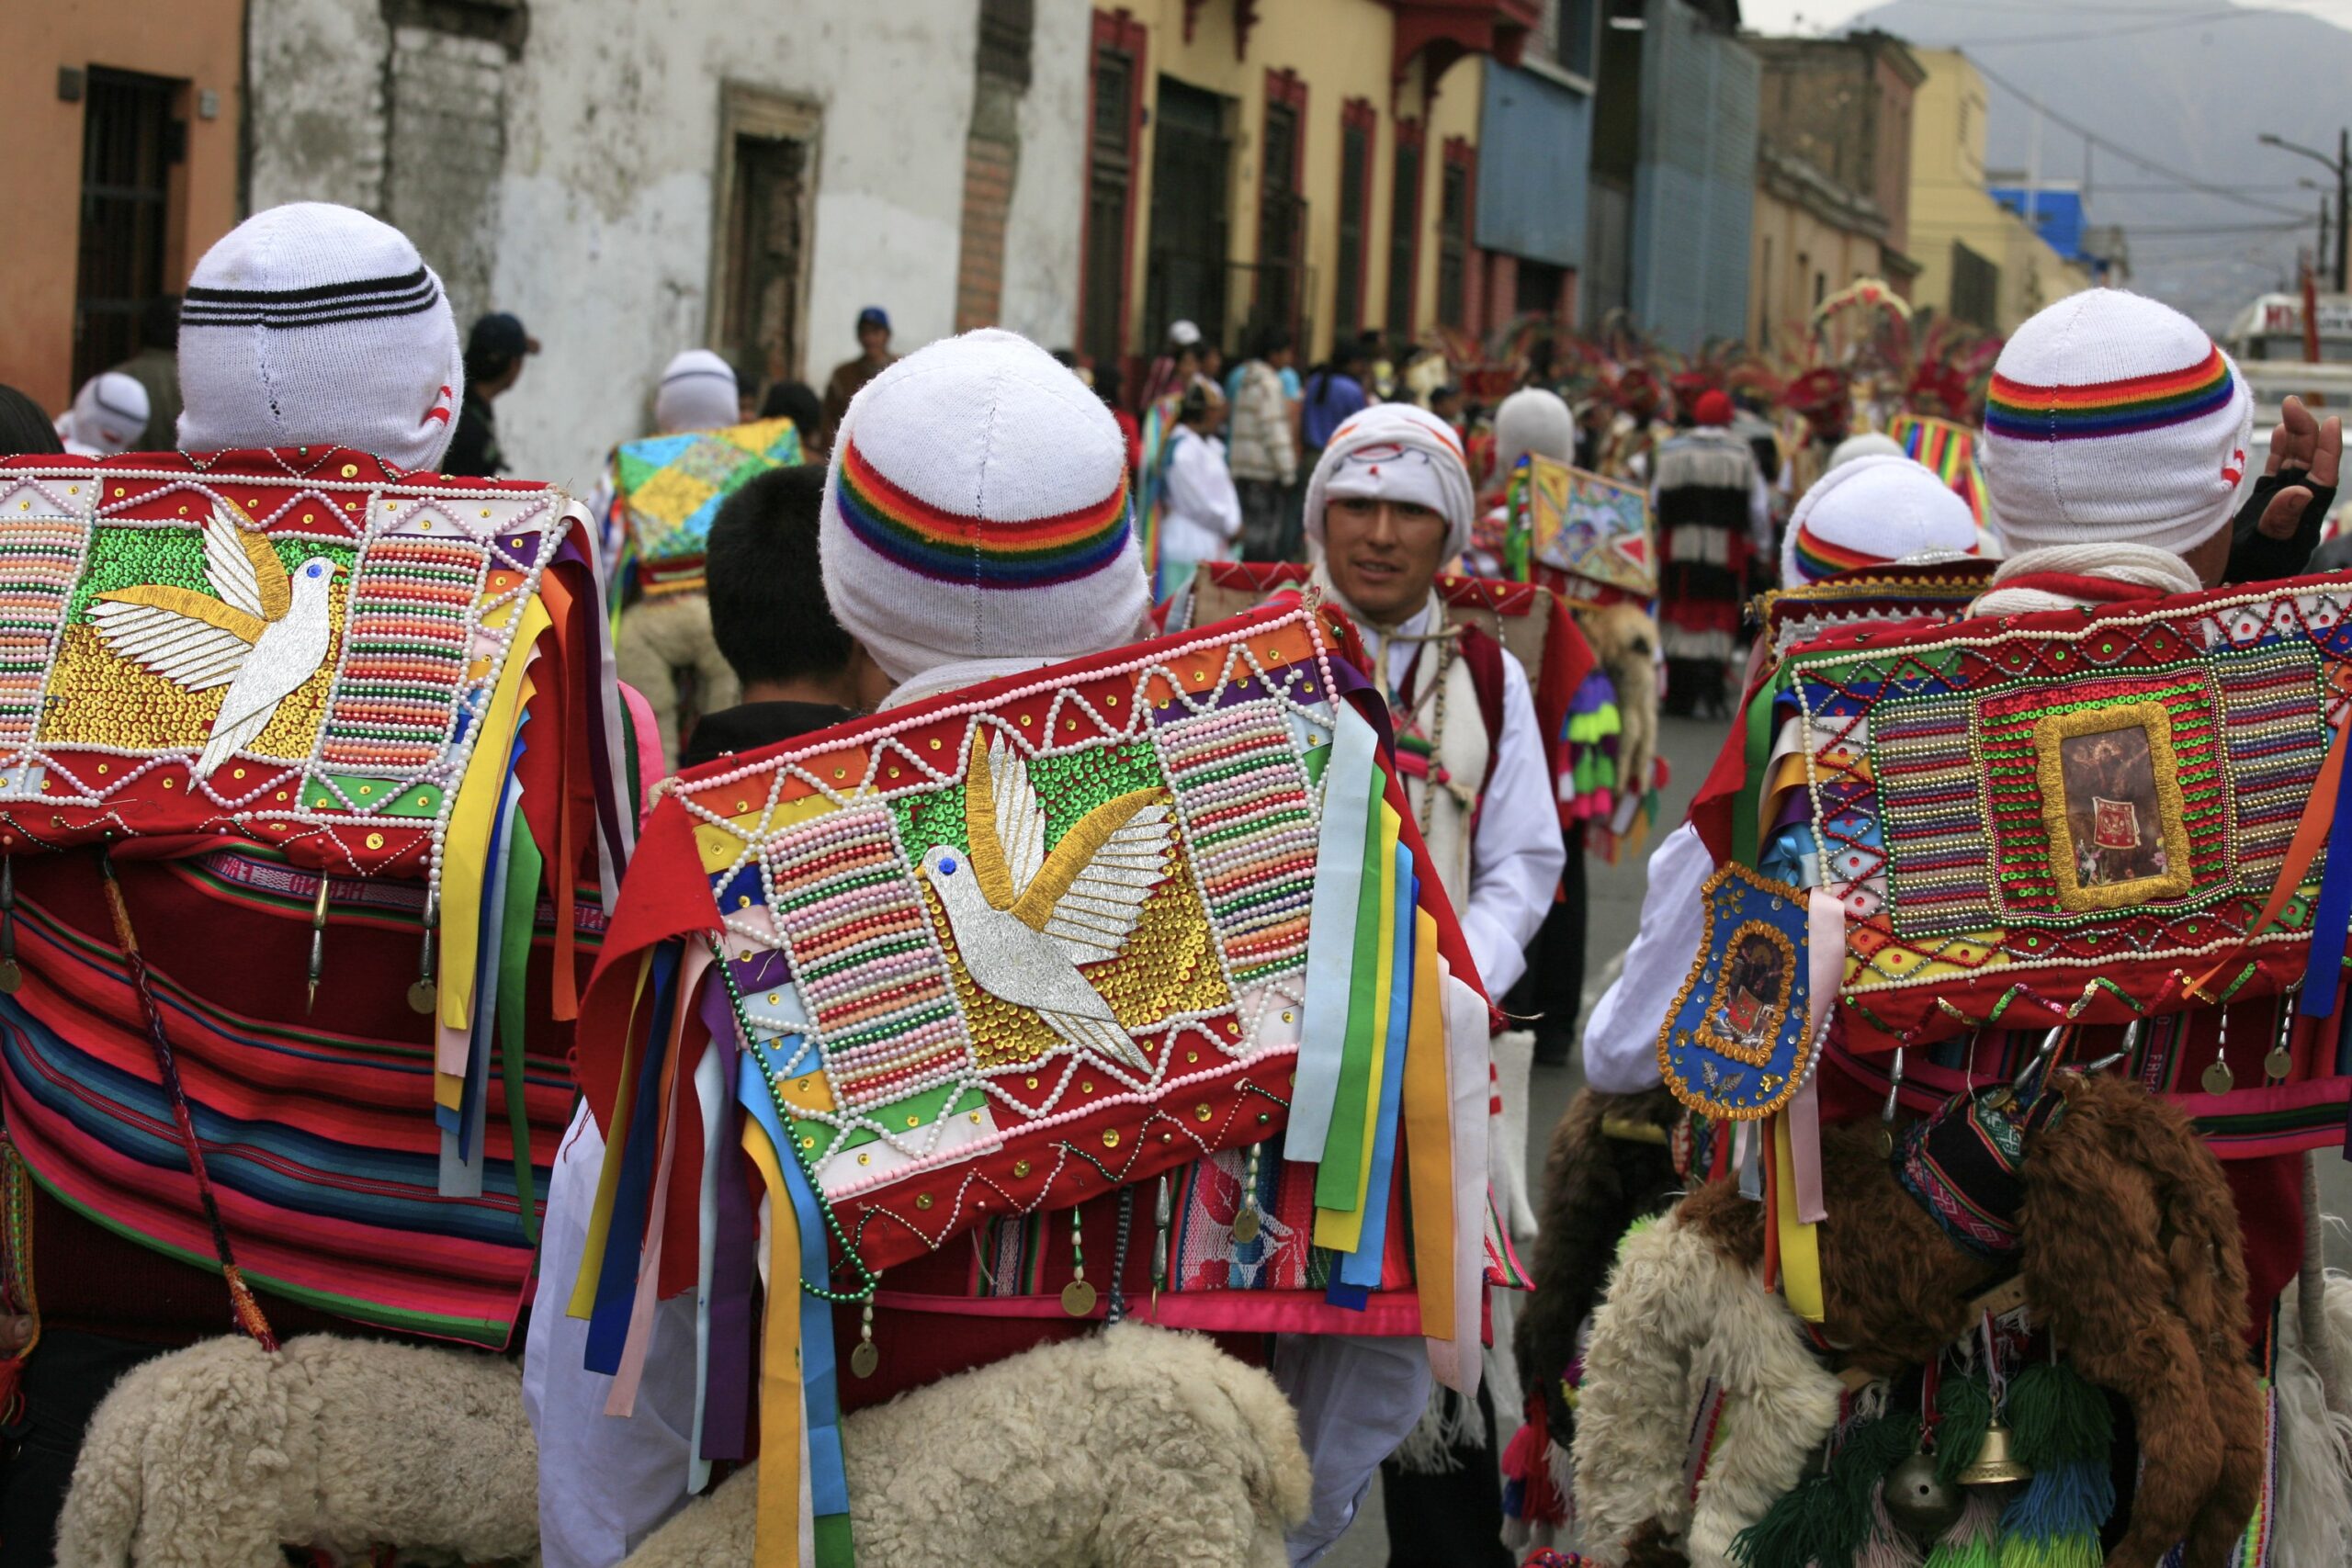 10 Incredible Aspects of Qoyllur Rit’i Festival: An Immersive Journey into Traditional Andean Music